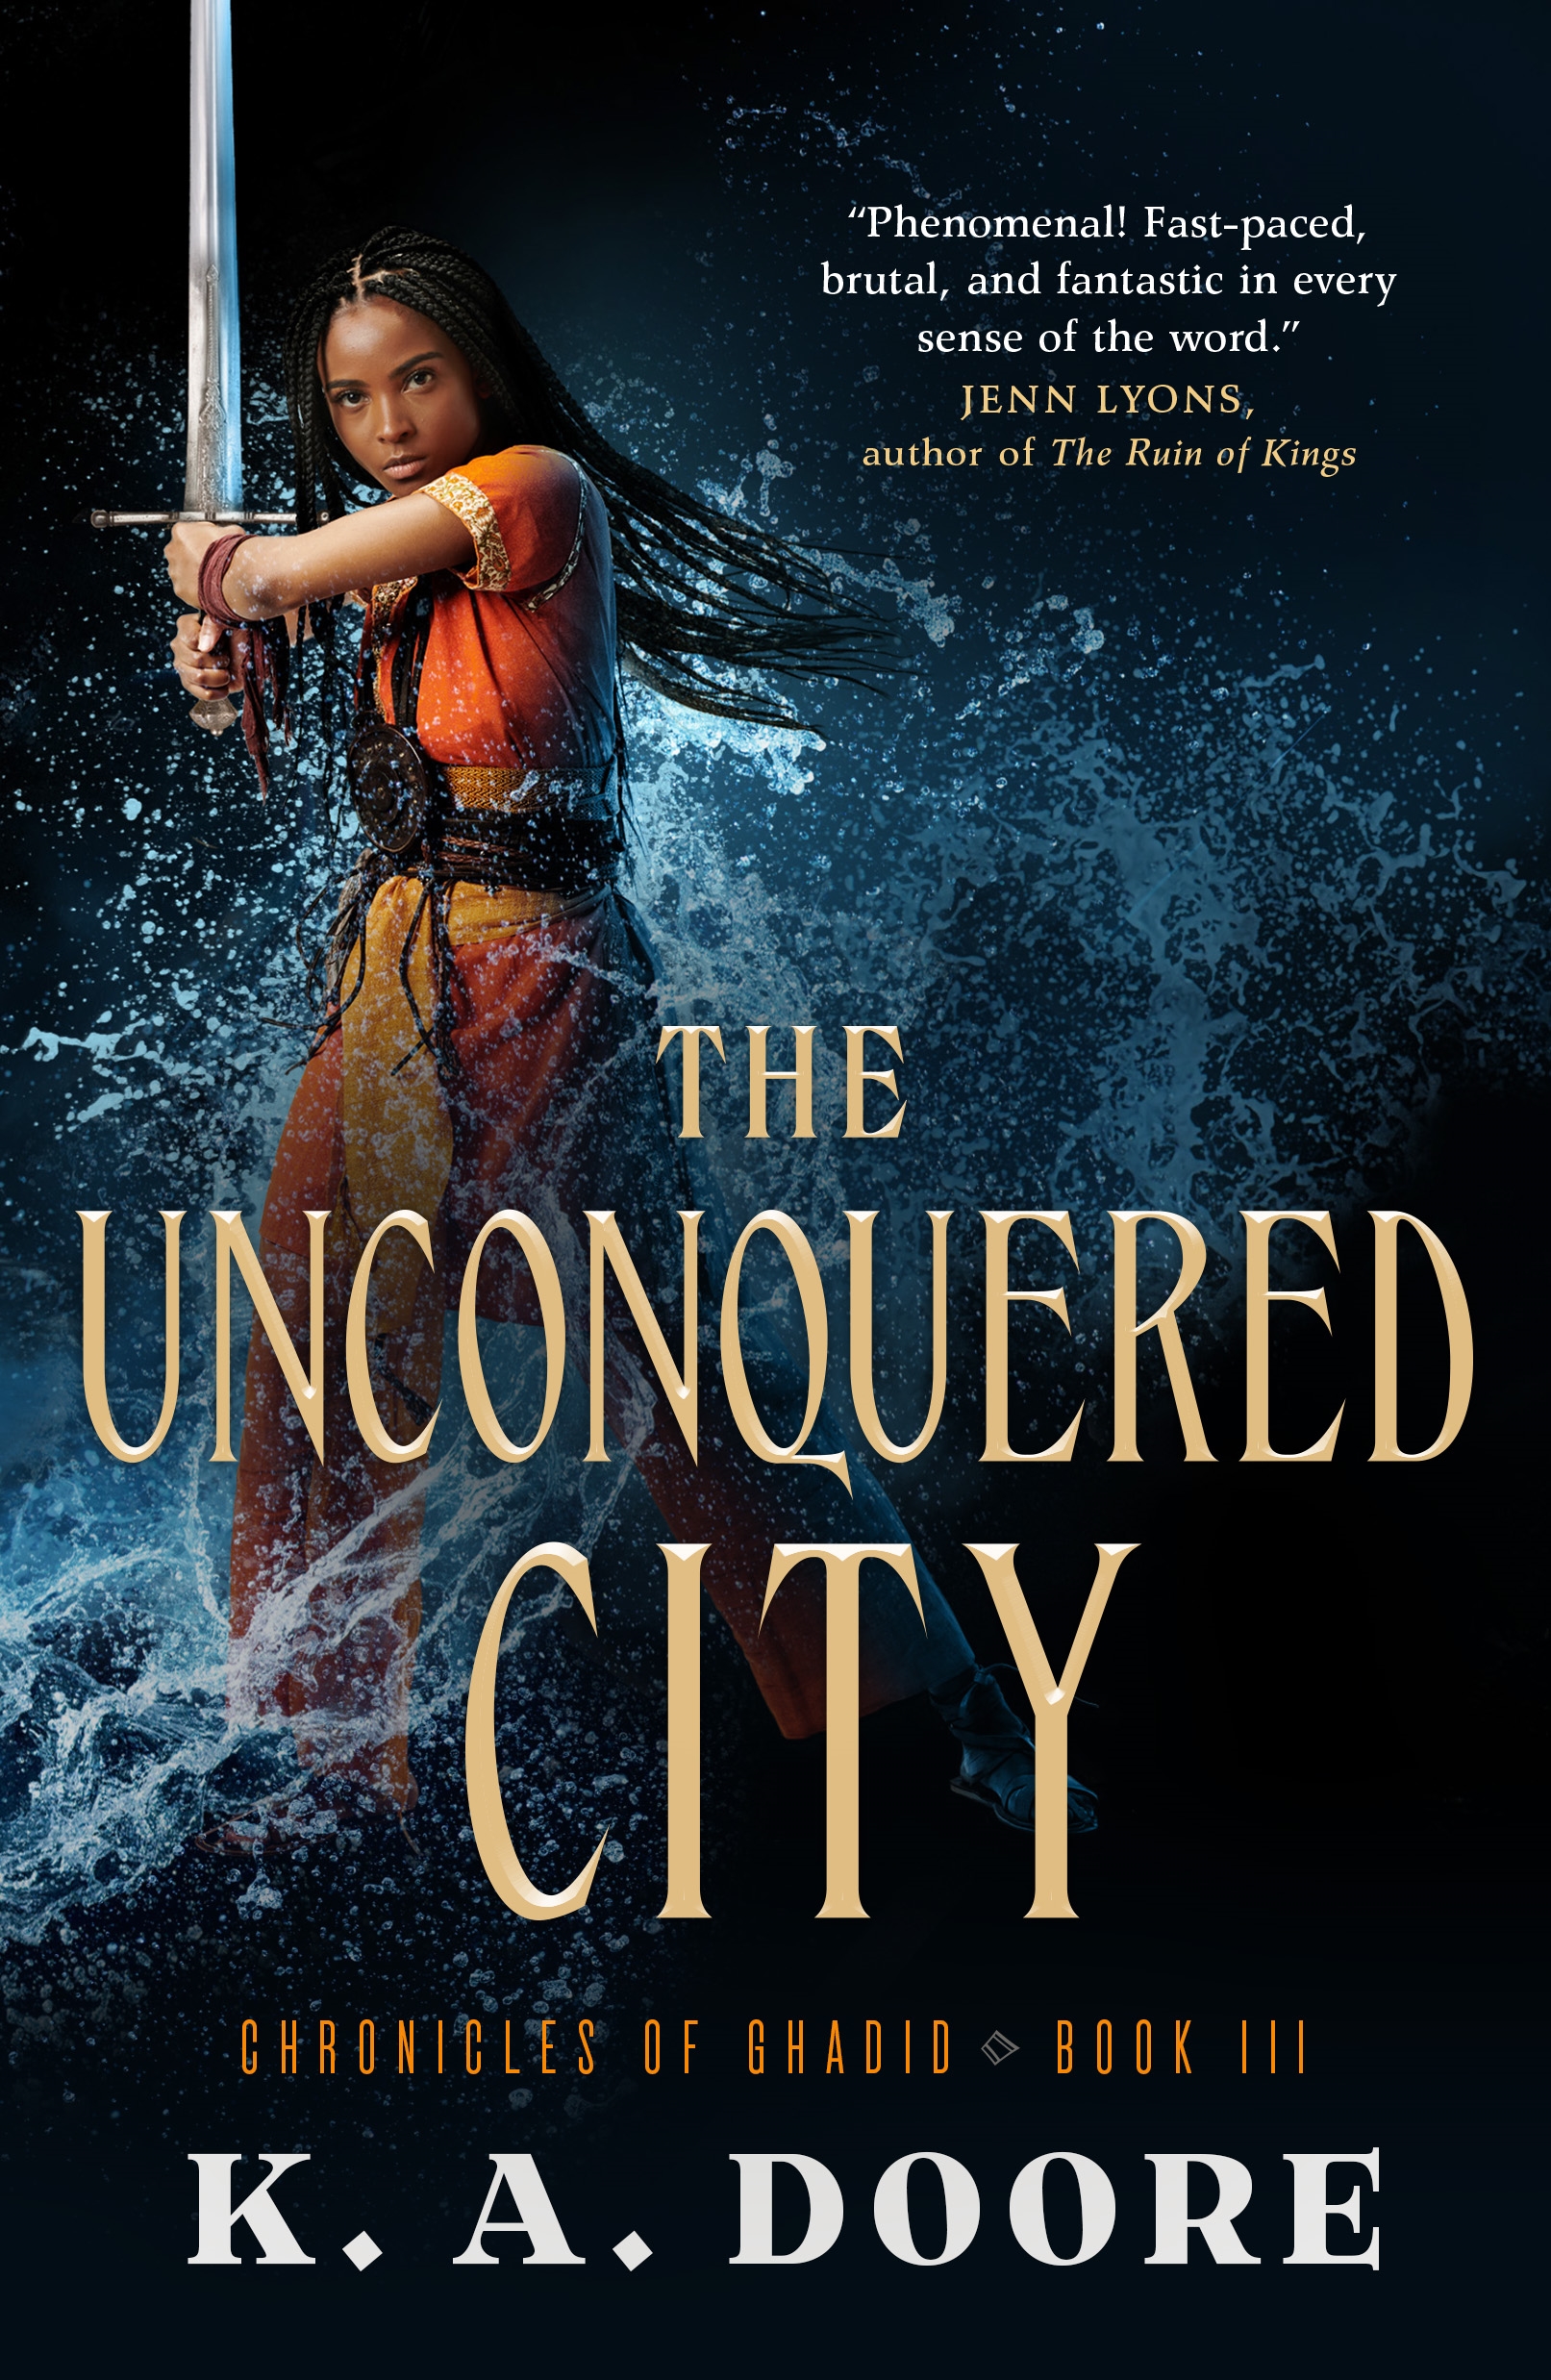 The Unconquered City : Book 3 in the Chronicles of Ghadid by K. A. Doore